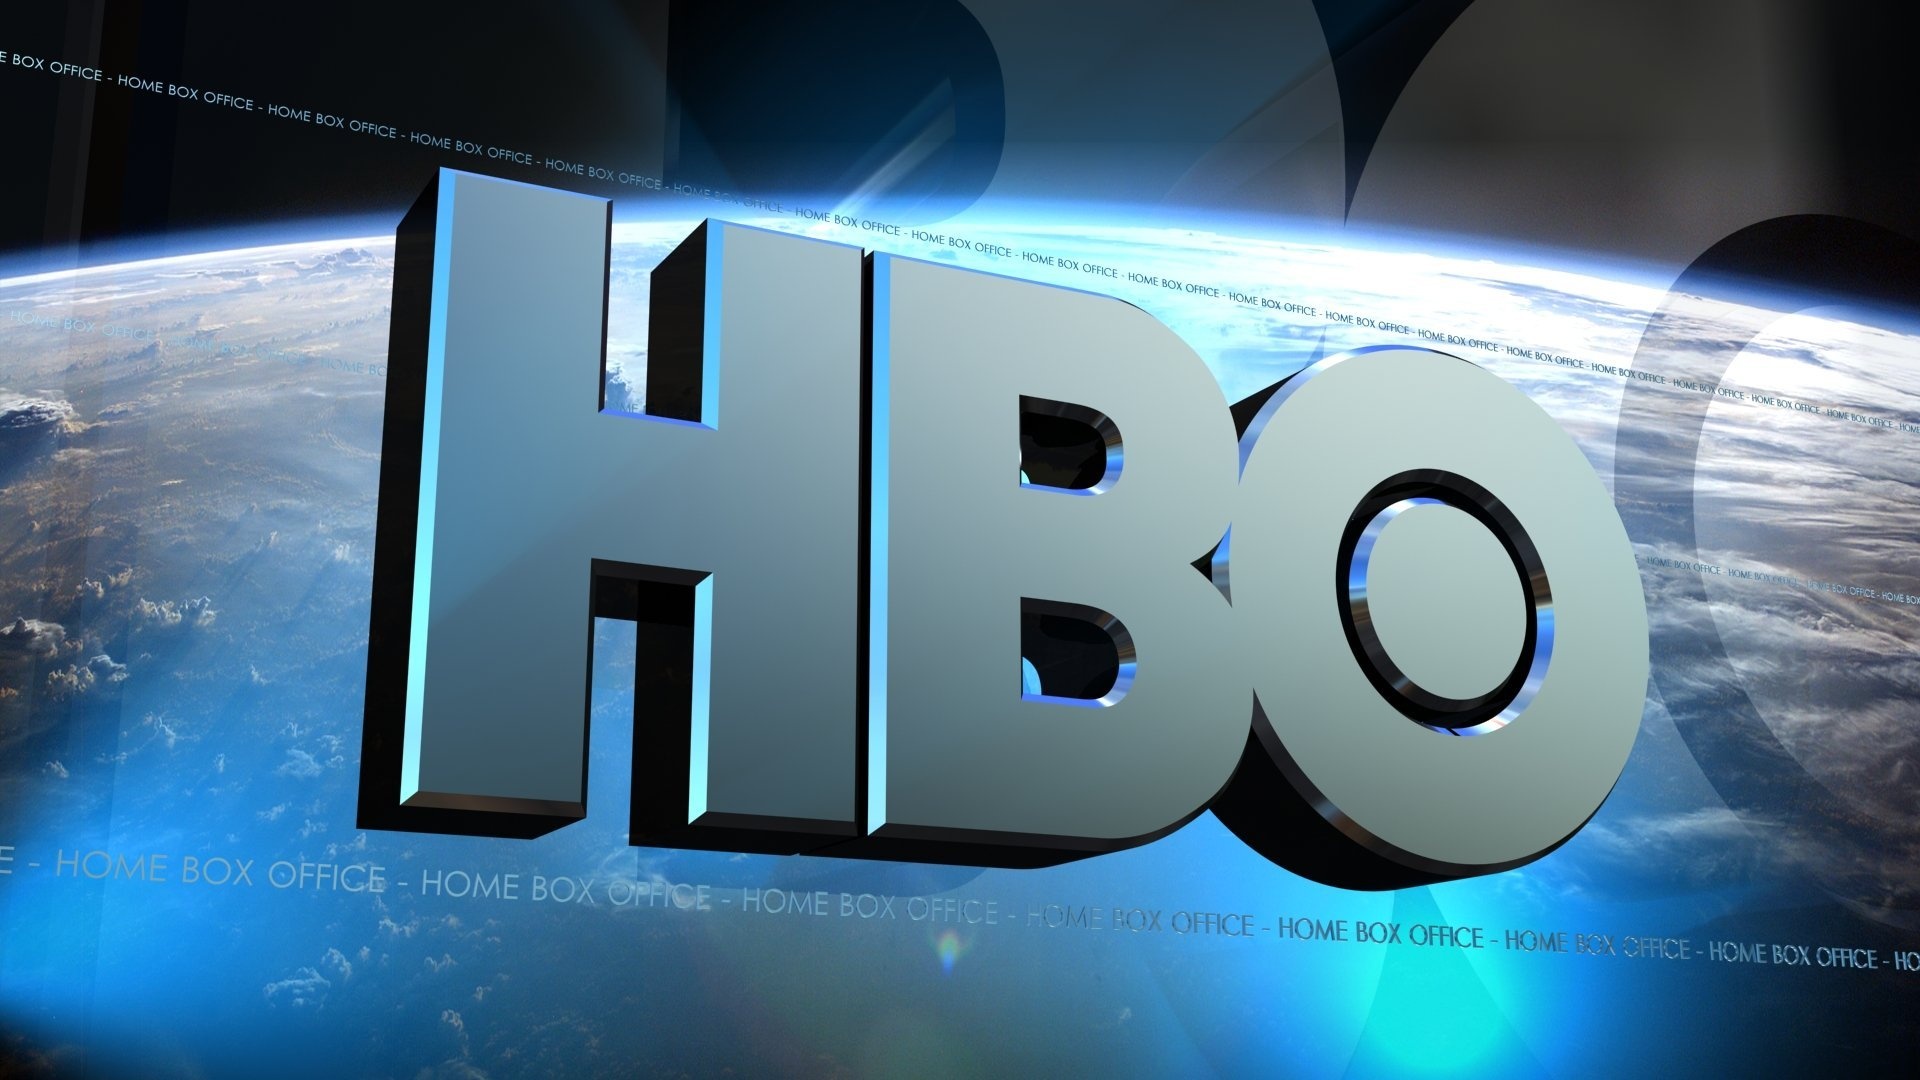 HBO: The first national cable channel, Owned by Warner Bros. Discovery. 1920x1080 Full HD Background.